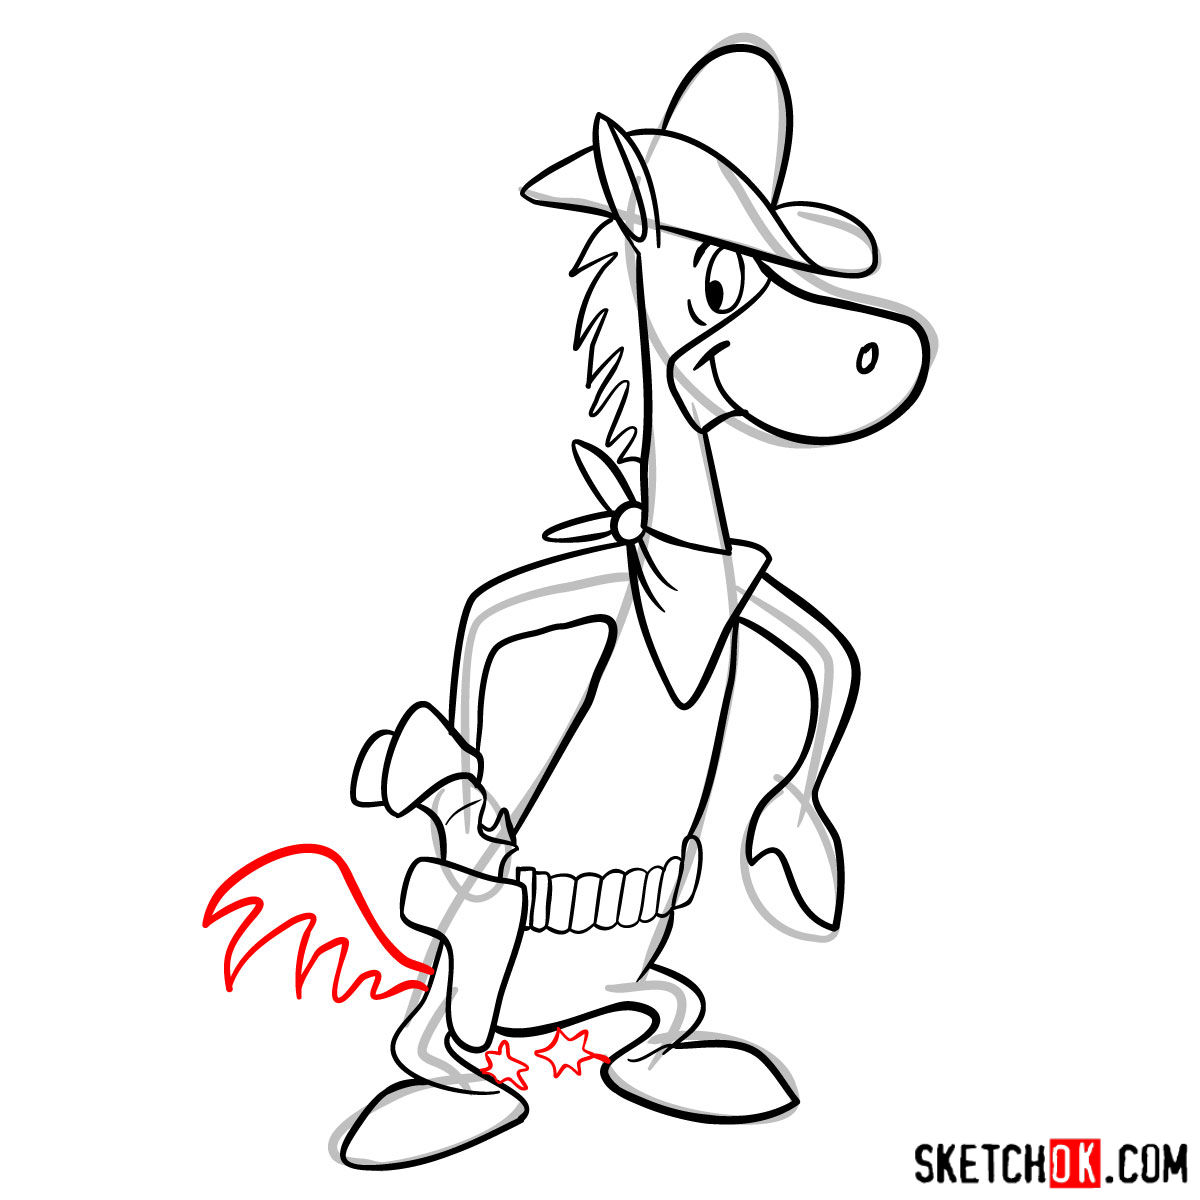 How to draw Quick Draw McGraw - step 10